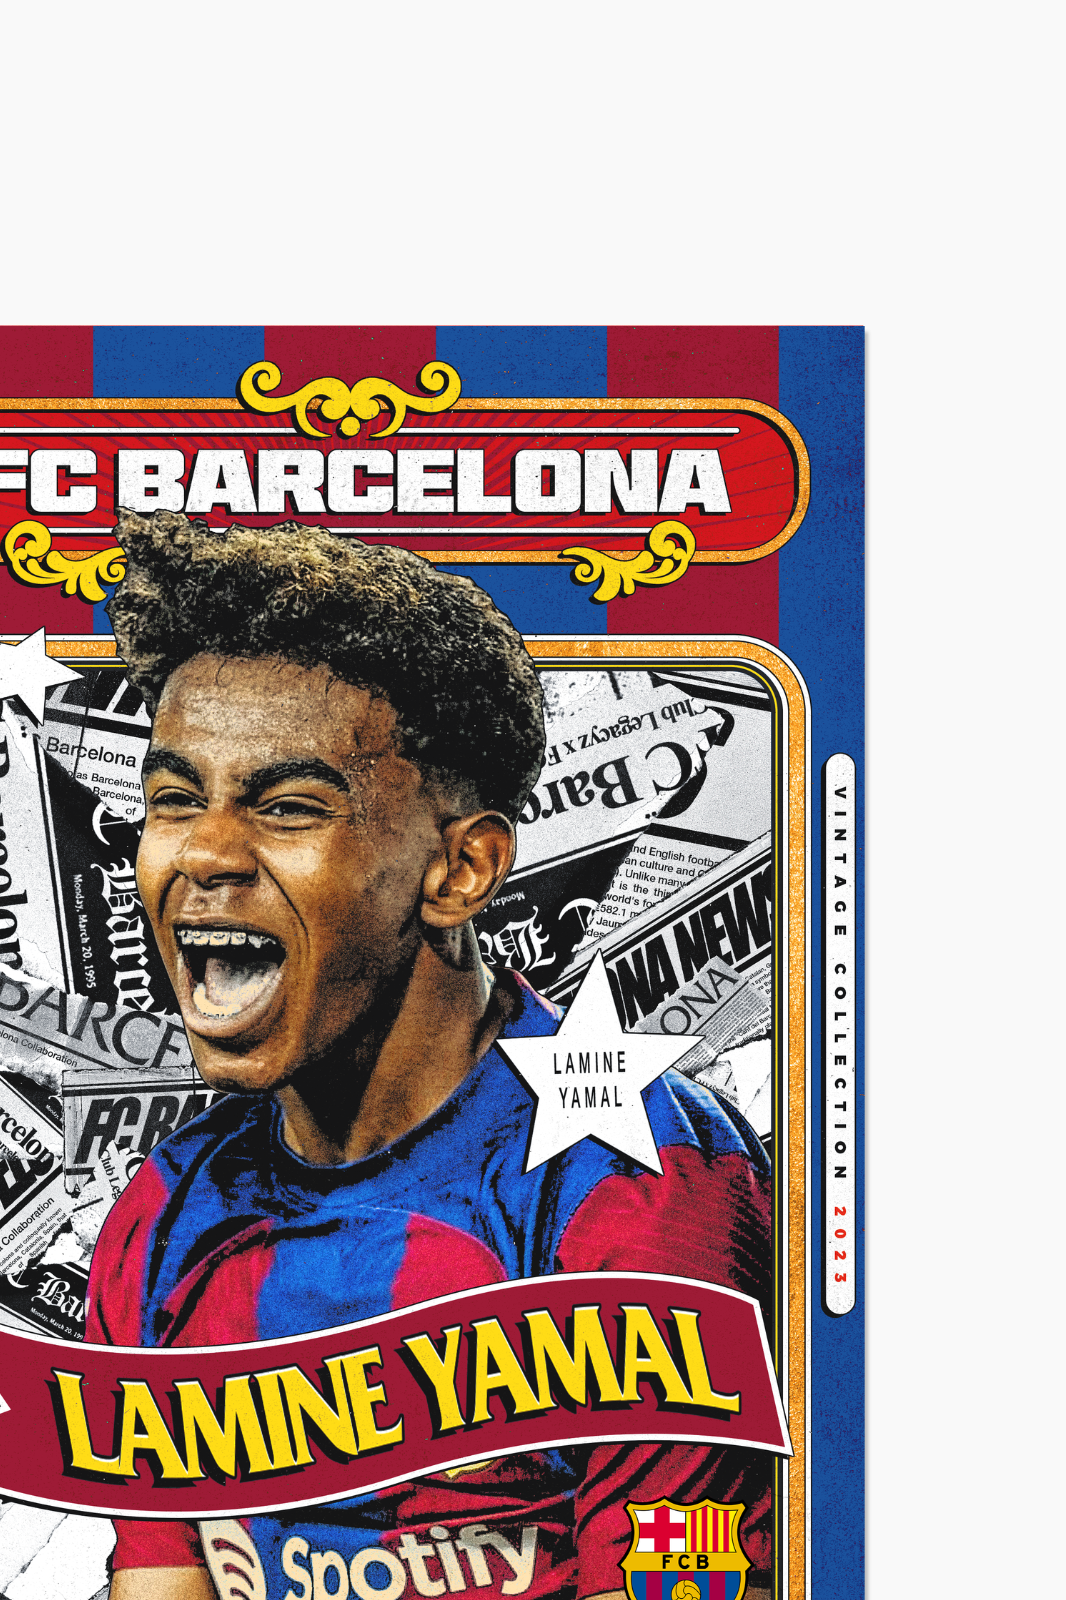 FC Barcelona - Lamine Yamal Retro poster limited to 100